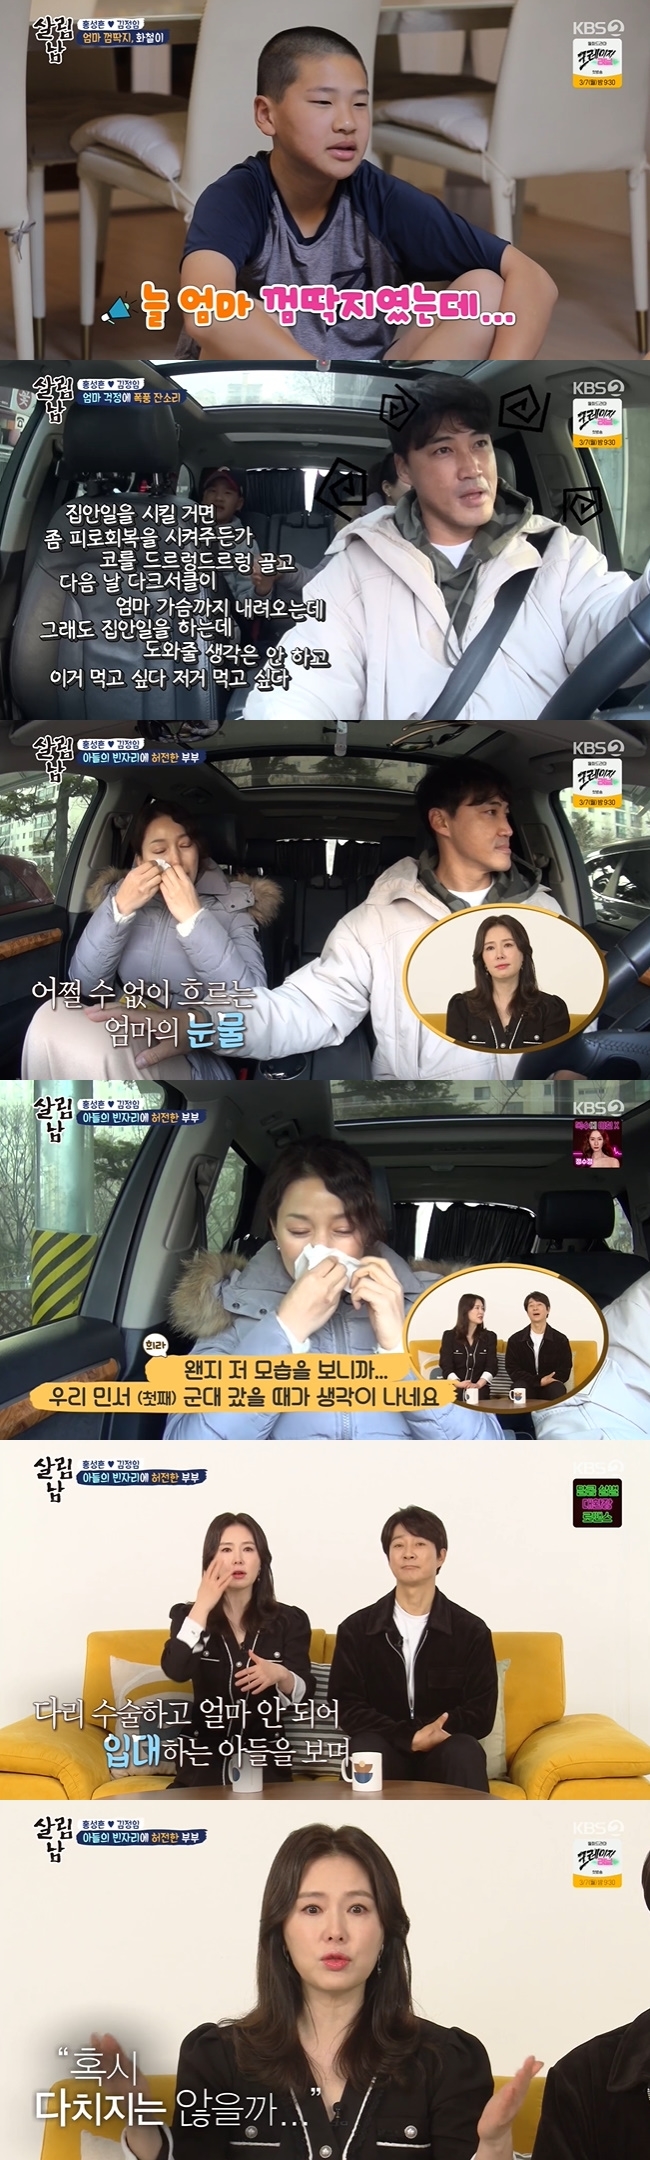 Hong Sung-heons wife Kim Jung Im wept behind her concern for her son, who had left battery training; Ha Hee-ra empathised as she recalled her son enlisting.Hong Sung-heons son Hong Hwa-cheol will leave for battery training for the first time for a month on KBS 2TVs Season 2 of Living Men, which was broadcast on February 26.When his son Honghwa-cheol left for a month in Gangwon-do, Kim Jung Im carefully packed his hot packs and snacks, which were handwritten.Hong Sung-heon said, I did not have this when I went to battery training.Hong Hwa-cheol, who had not been away from her mother for a long time, said, I will not go.When Hong Sung-heon comforted him, There is a Father, Hong Hwa-cheol said, It is a problem because there is a Father.Kim Jung Im, who watched the back of his son who left the battery training on the bus with baseball members, felt his sons vacancy as soon as he got in the car and tears burst.Kim Jung Im said, Im afraid Im going to be a bit of a scolding, but Im big and I cant comfort you.